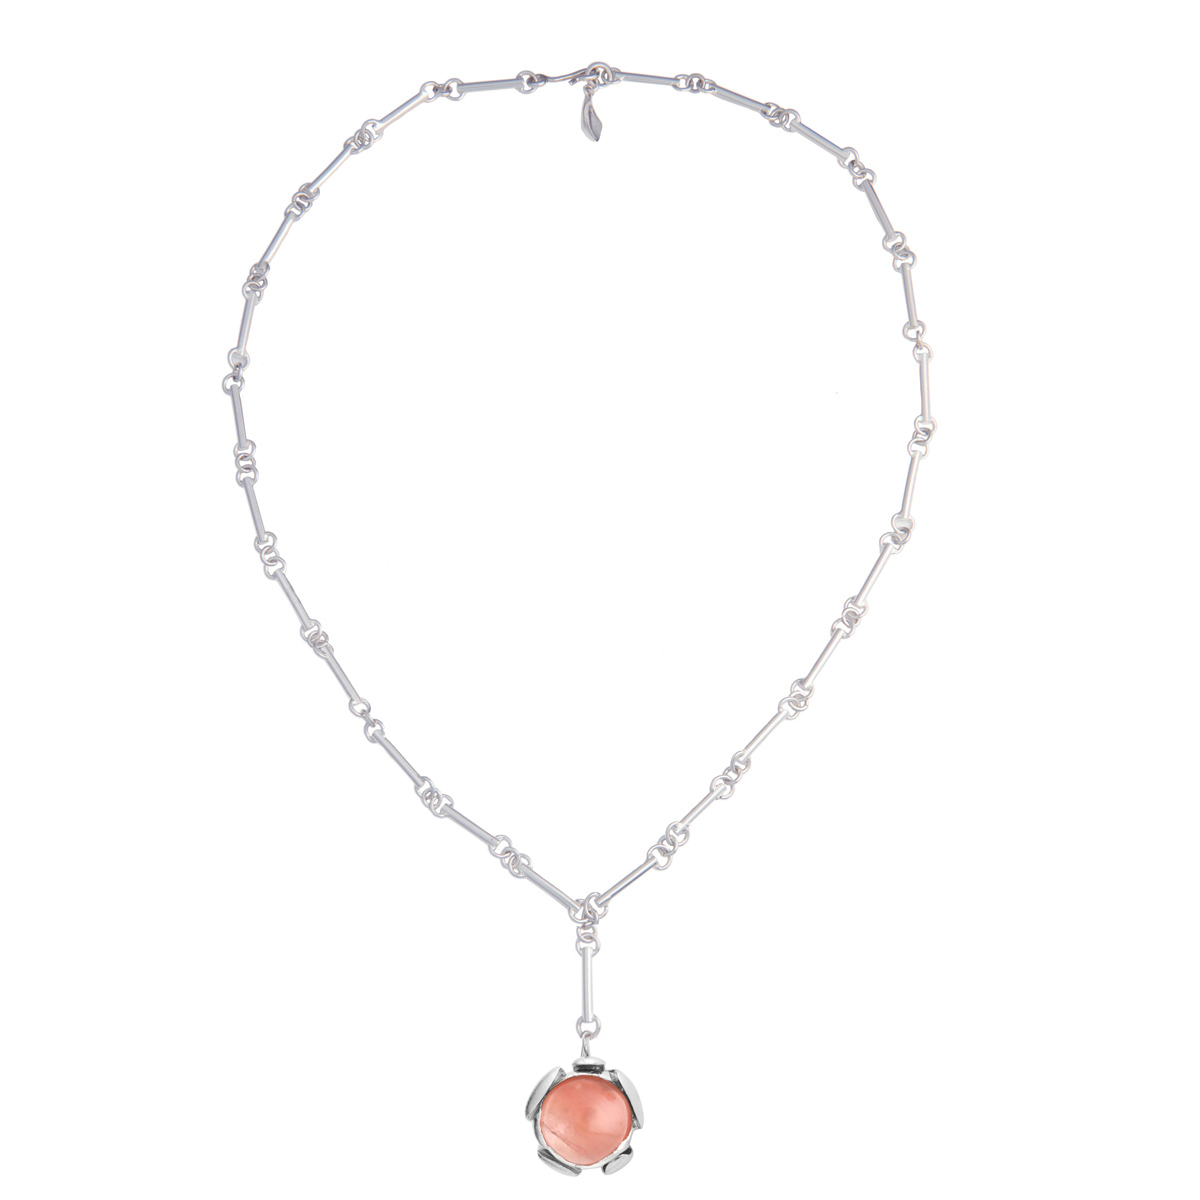 Blossom collier with rose agate by Hyrv jewelry brand from Estonia.